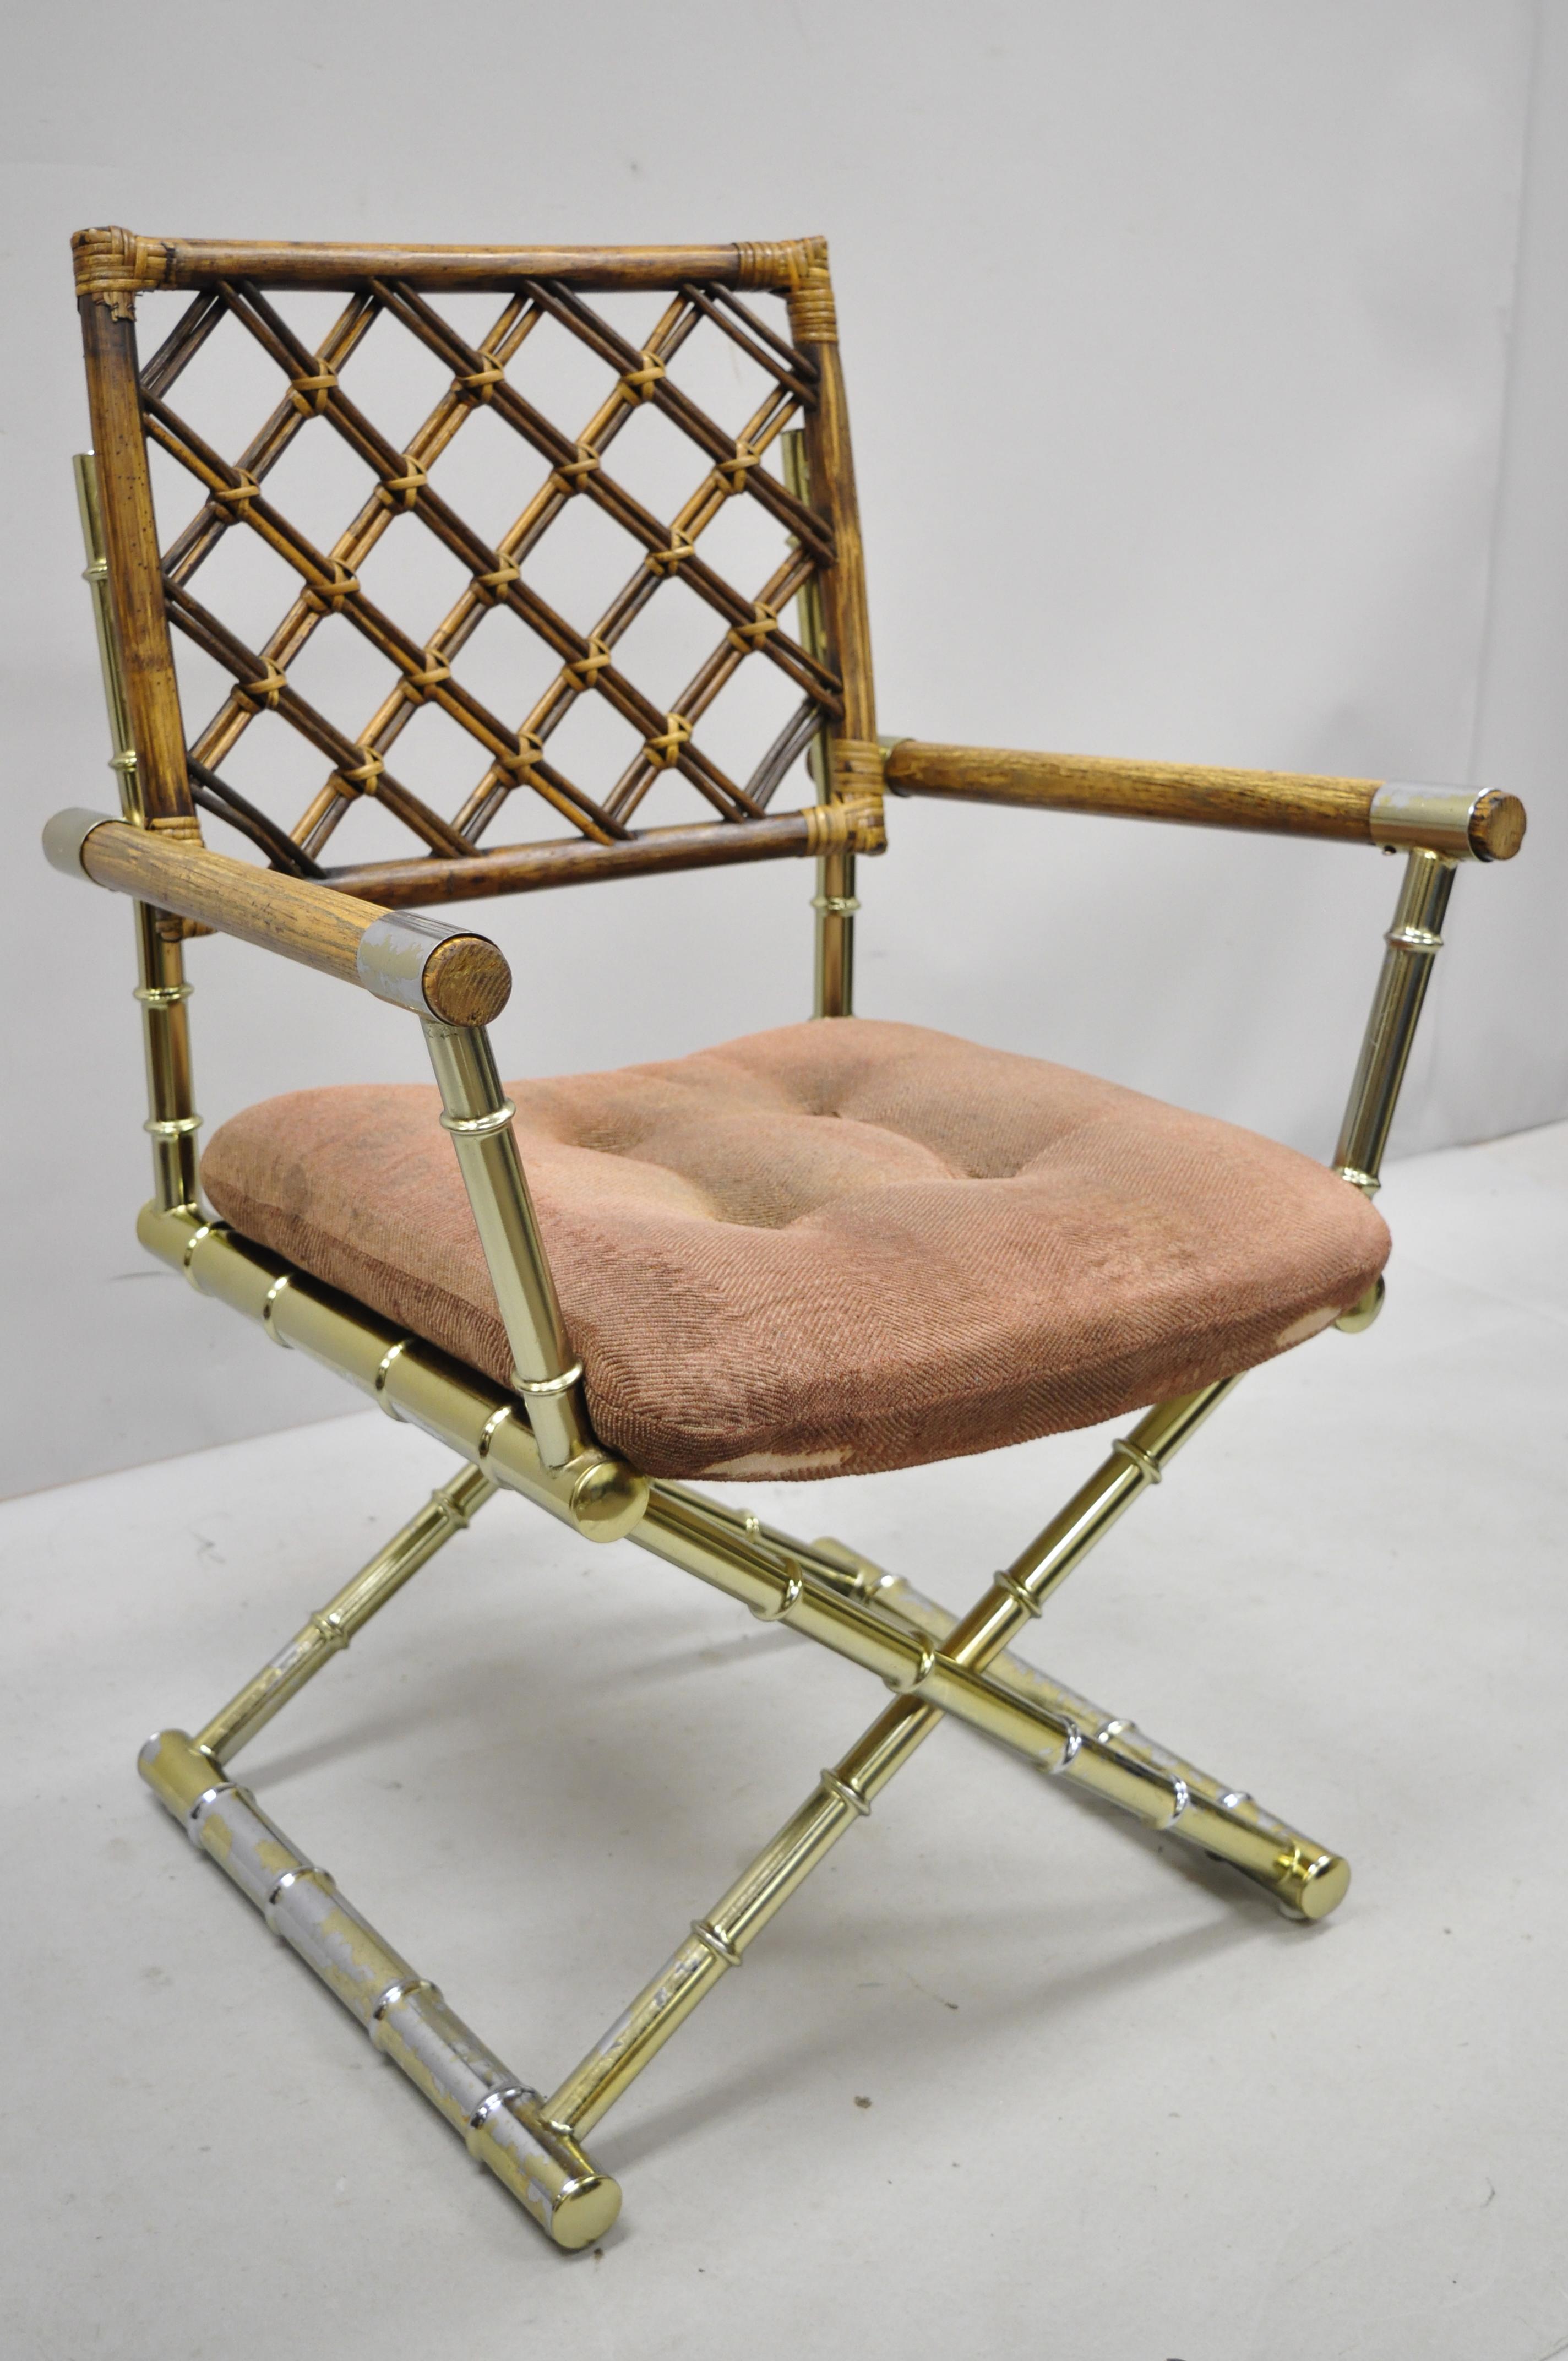 Vintage Daystrom brass faux bamboo Lattice rattan directors armchair gold.
Listing includes bamboo lattice back, brass plated metal X-form base, upholstered seat, great style and form, circa late 20th century. Measurements: 35.5